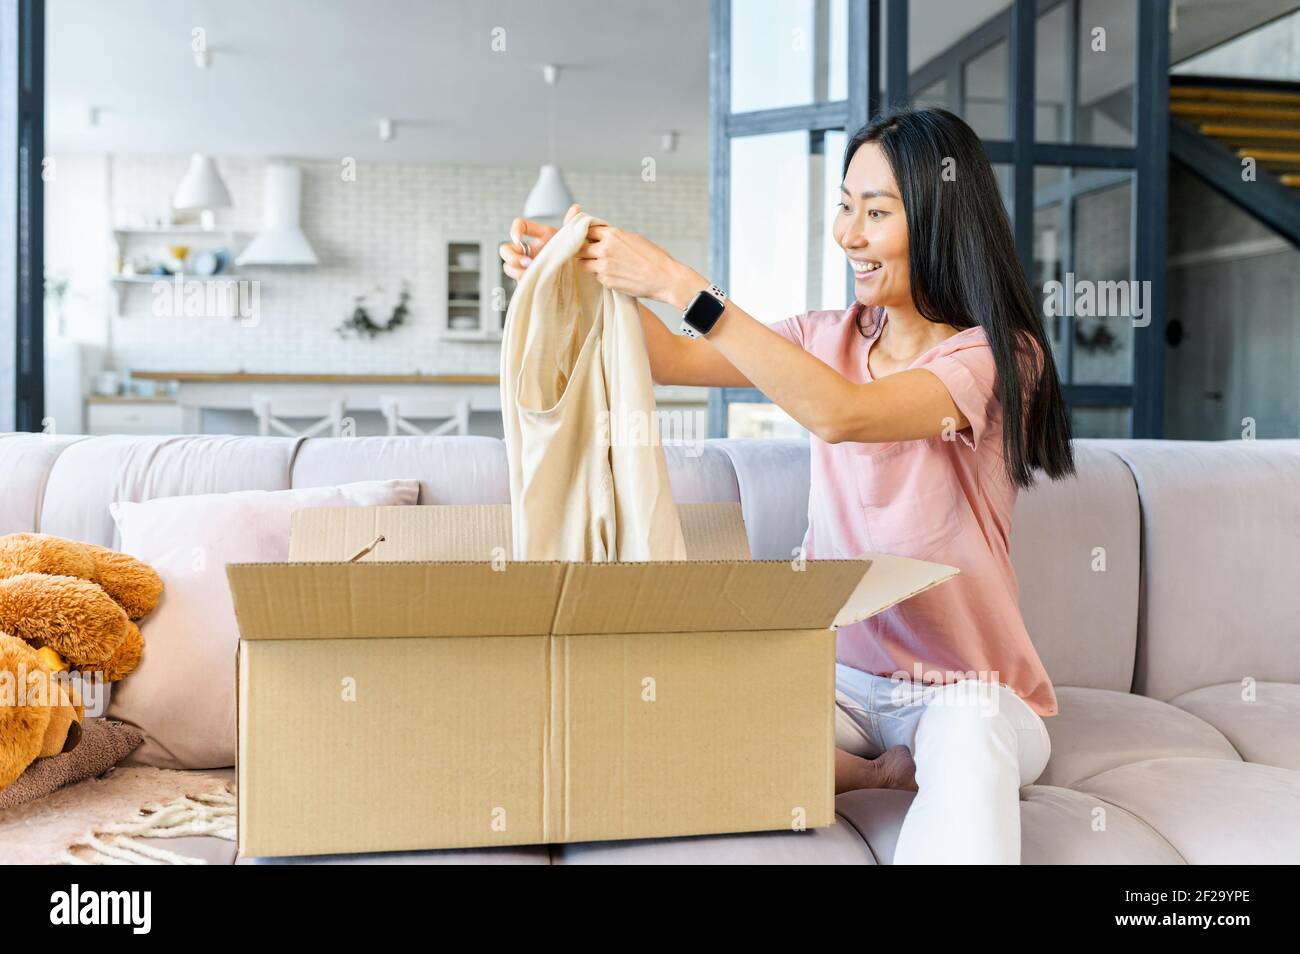 https://c8.alamy.com/comp/2F29YPE/excited-smiling-young-asian-woman-sitting-on-the-couch-holding-received-sweater-from-open-carton-box-unpacking-received-gifts-presents-from-online-store-happy-satisfied-with-fast-delivery-shipment-2F29YPE.jpg